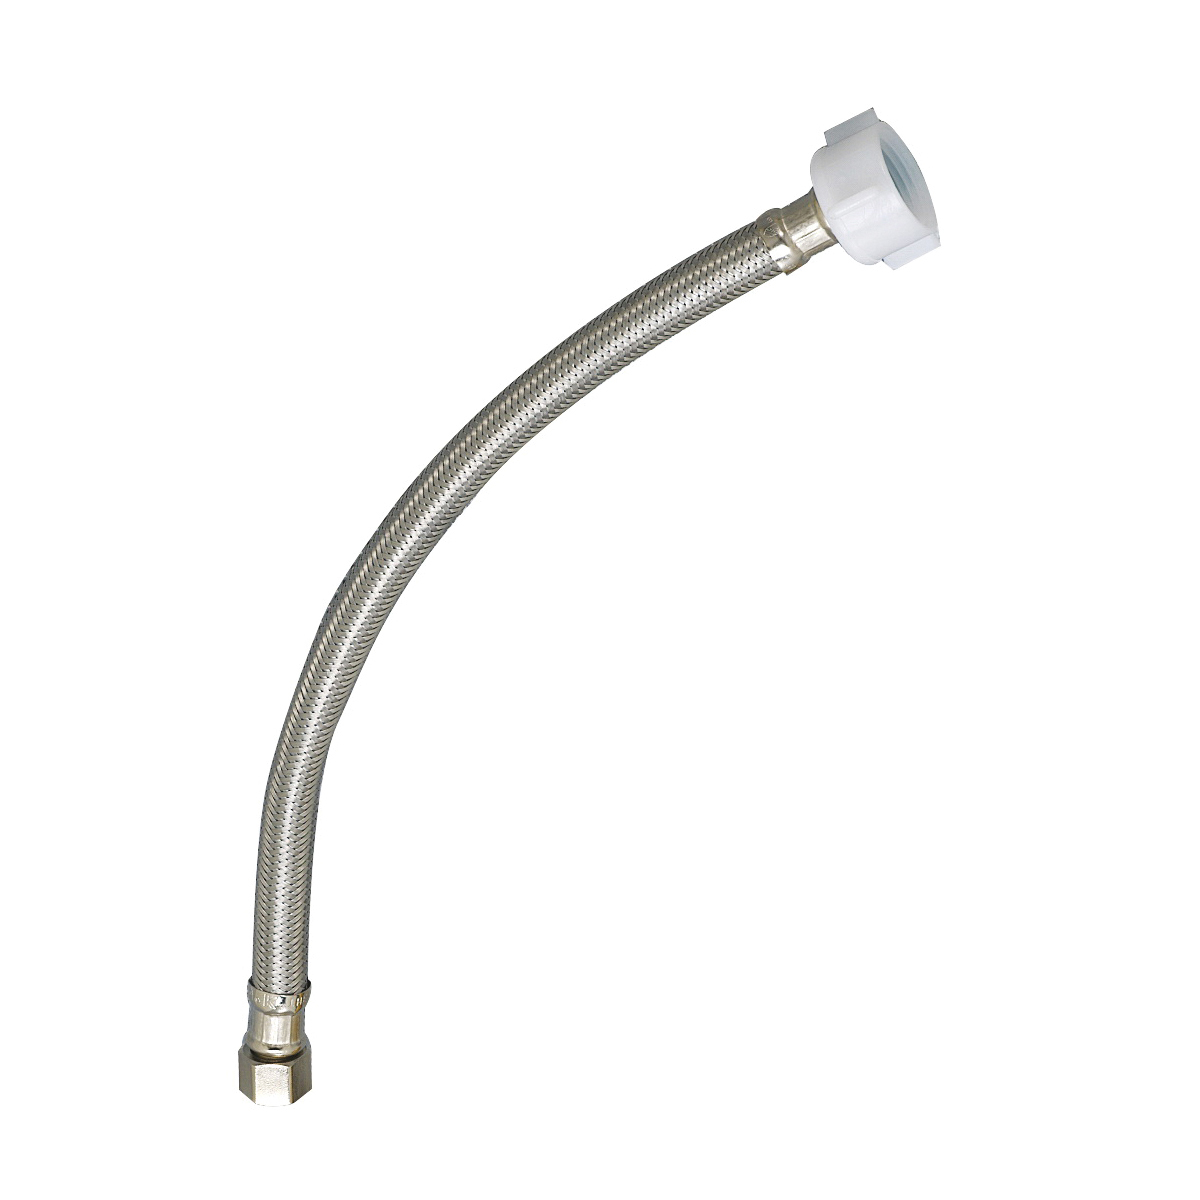 EZ Series PP23804 Toilet Supply Tube, 3/8 in Inlet, Compression Inlet, 7/8 in Outlet, Ballcock Outlet, 9 in L